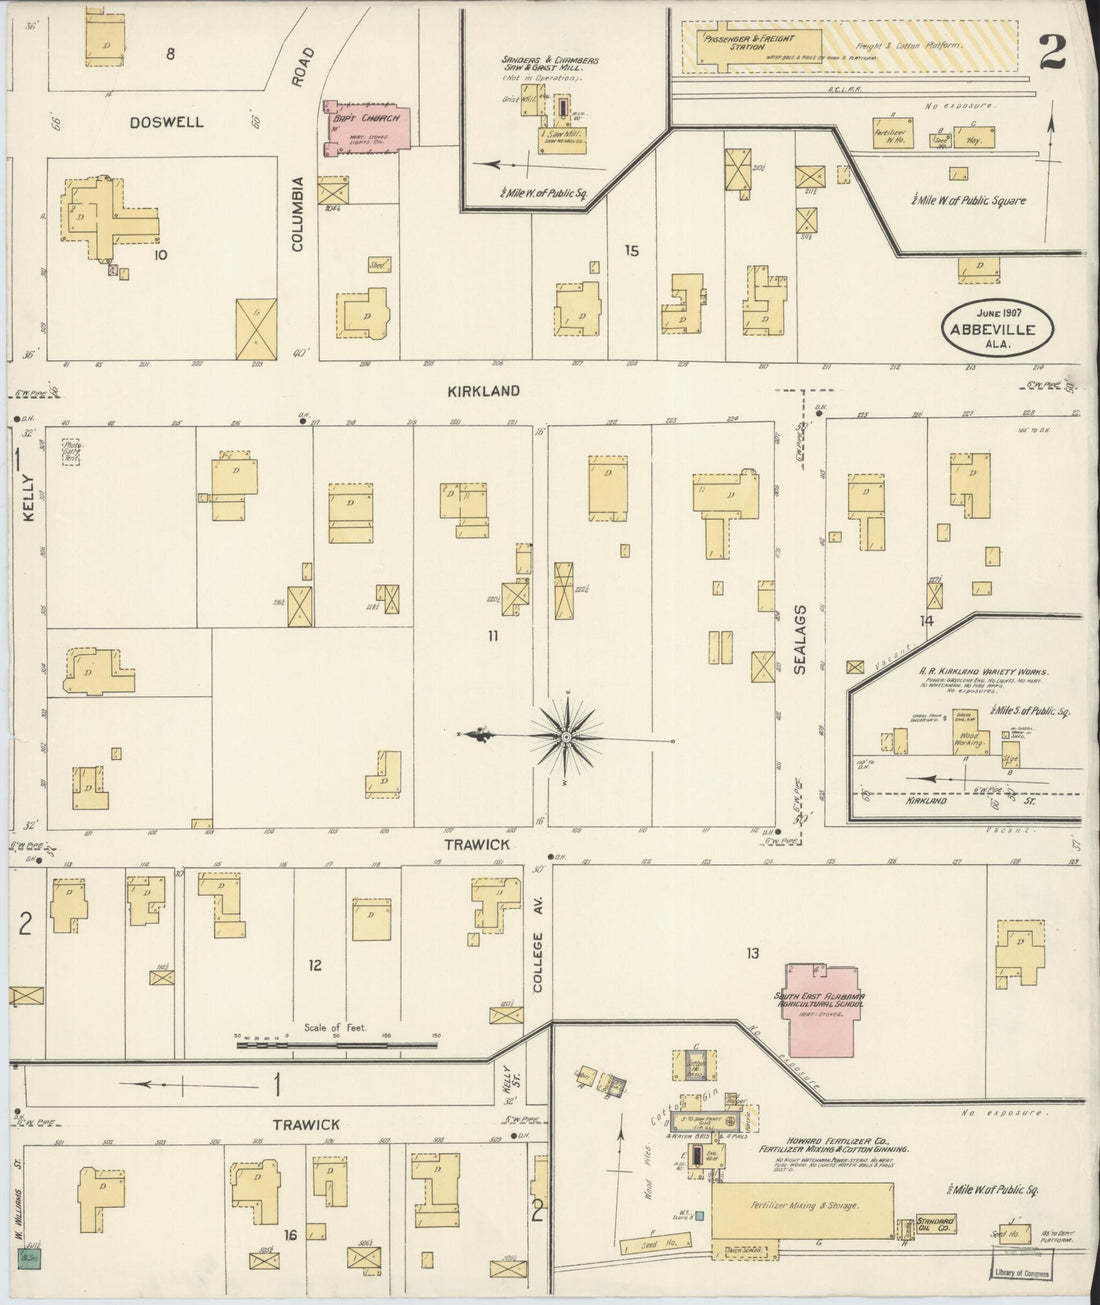 This old map of Abbeville, Henry County, Alabama was created by Sanborn Map Company in 1907